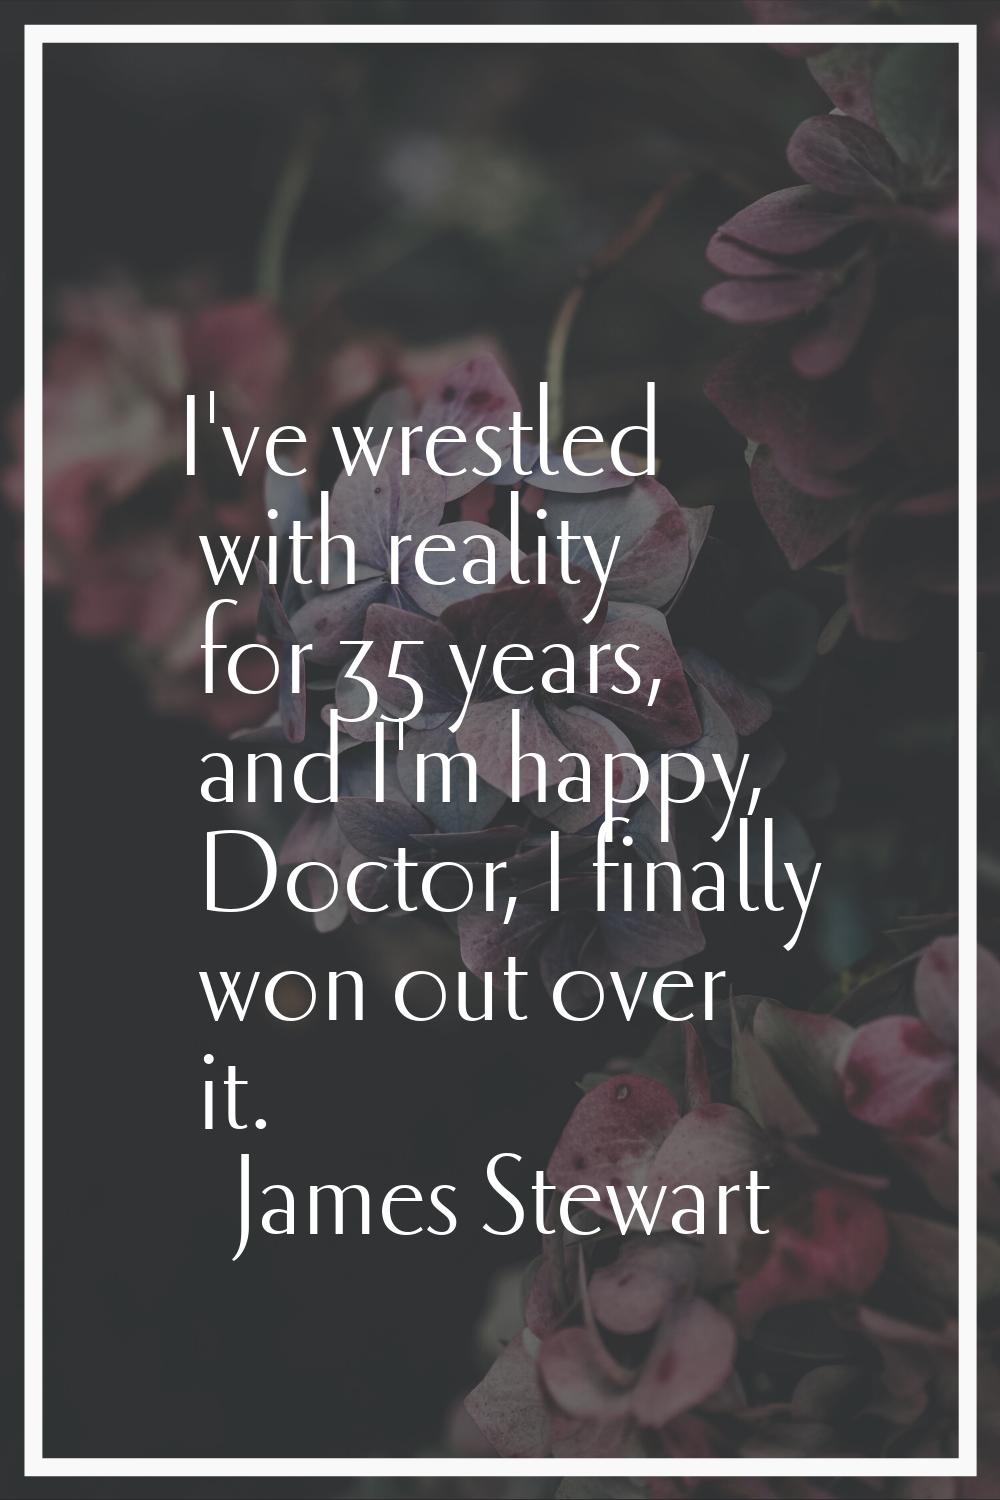 I've wrestled with reality for 35 years, and I'm happy, Doctor, I finally won out over it.